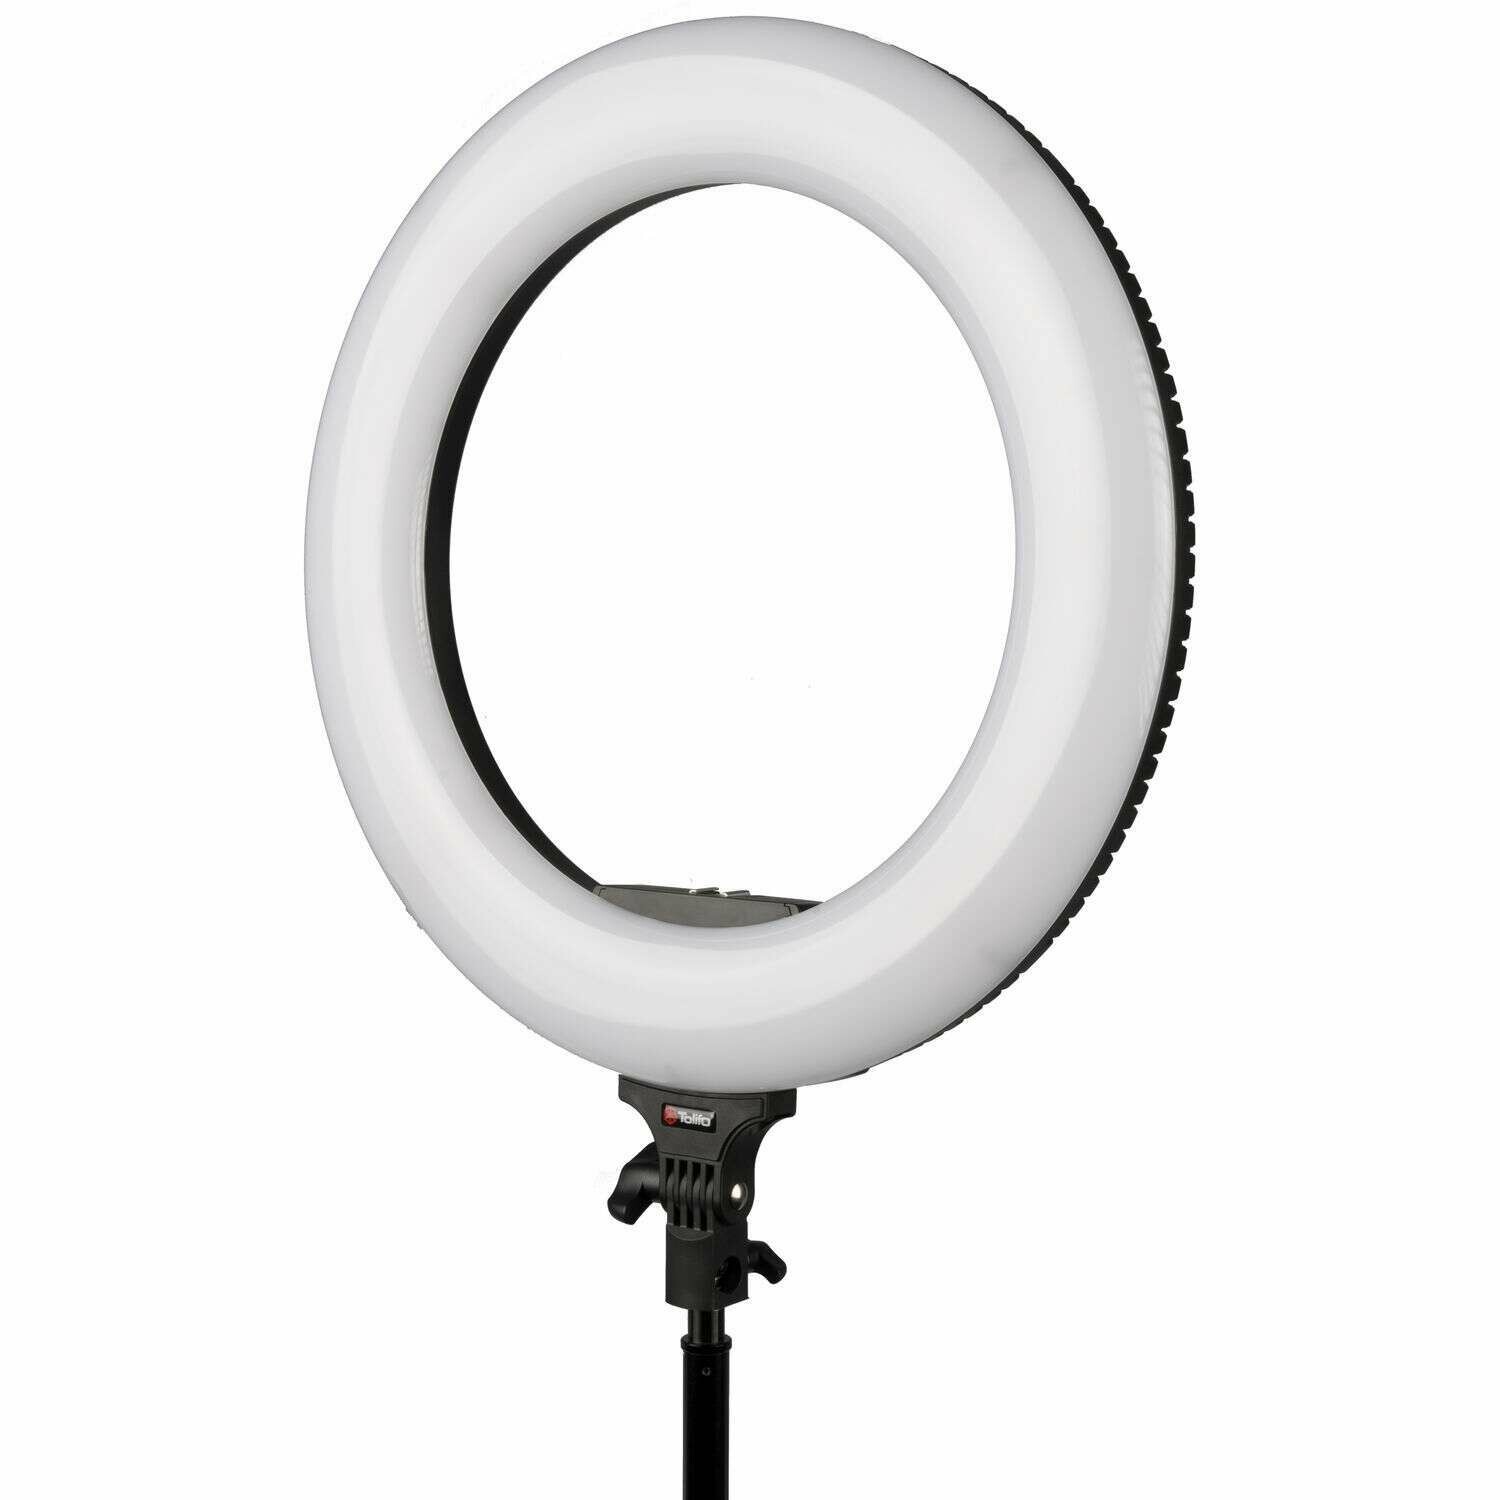 Tolifo R48B 48W Bi-color LED Ring Light With Accessories